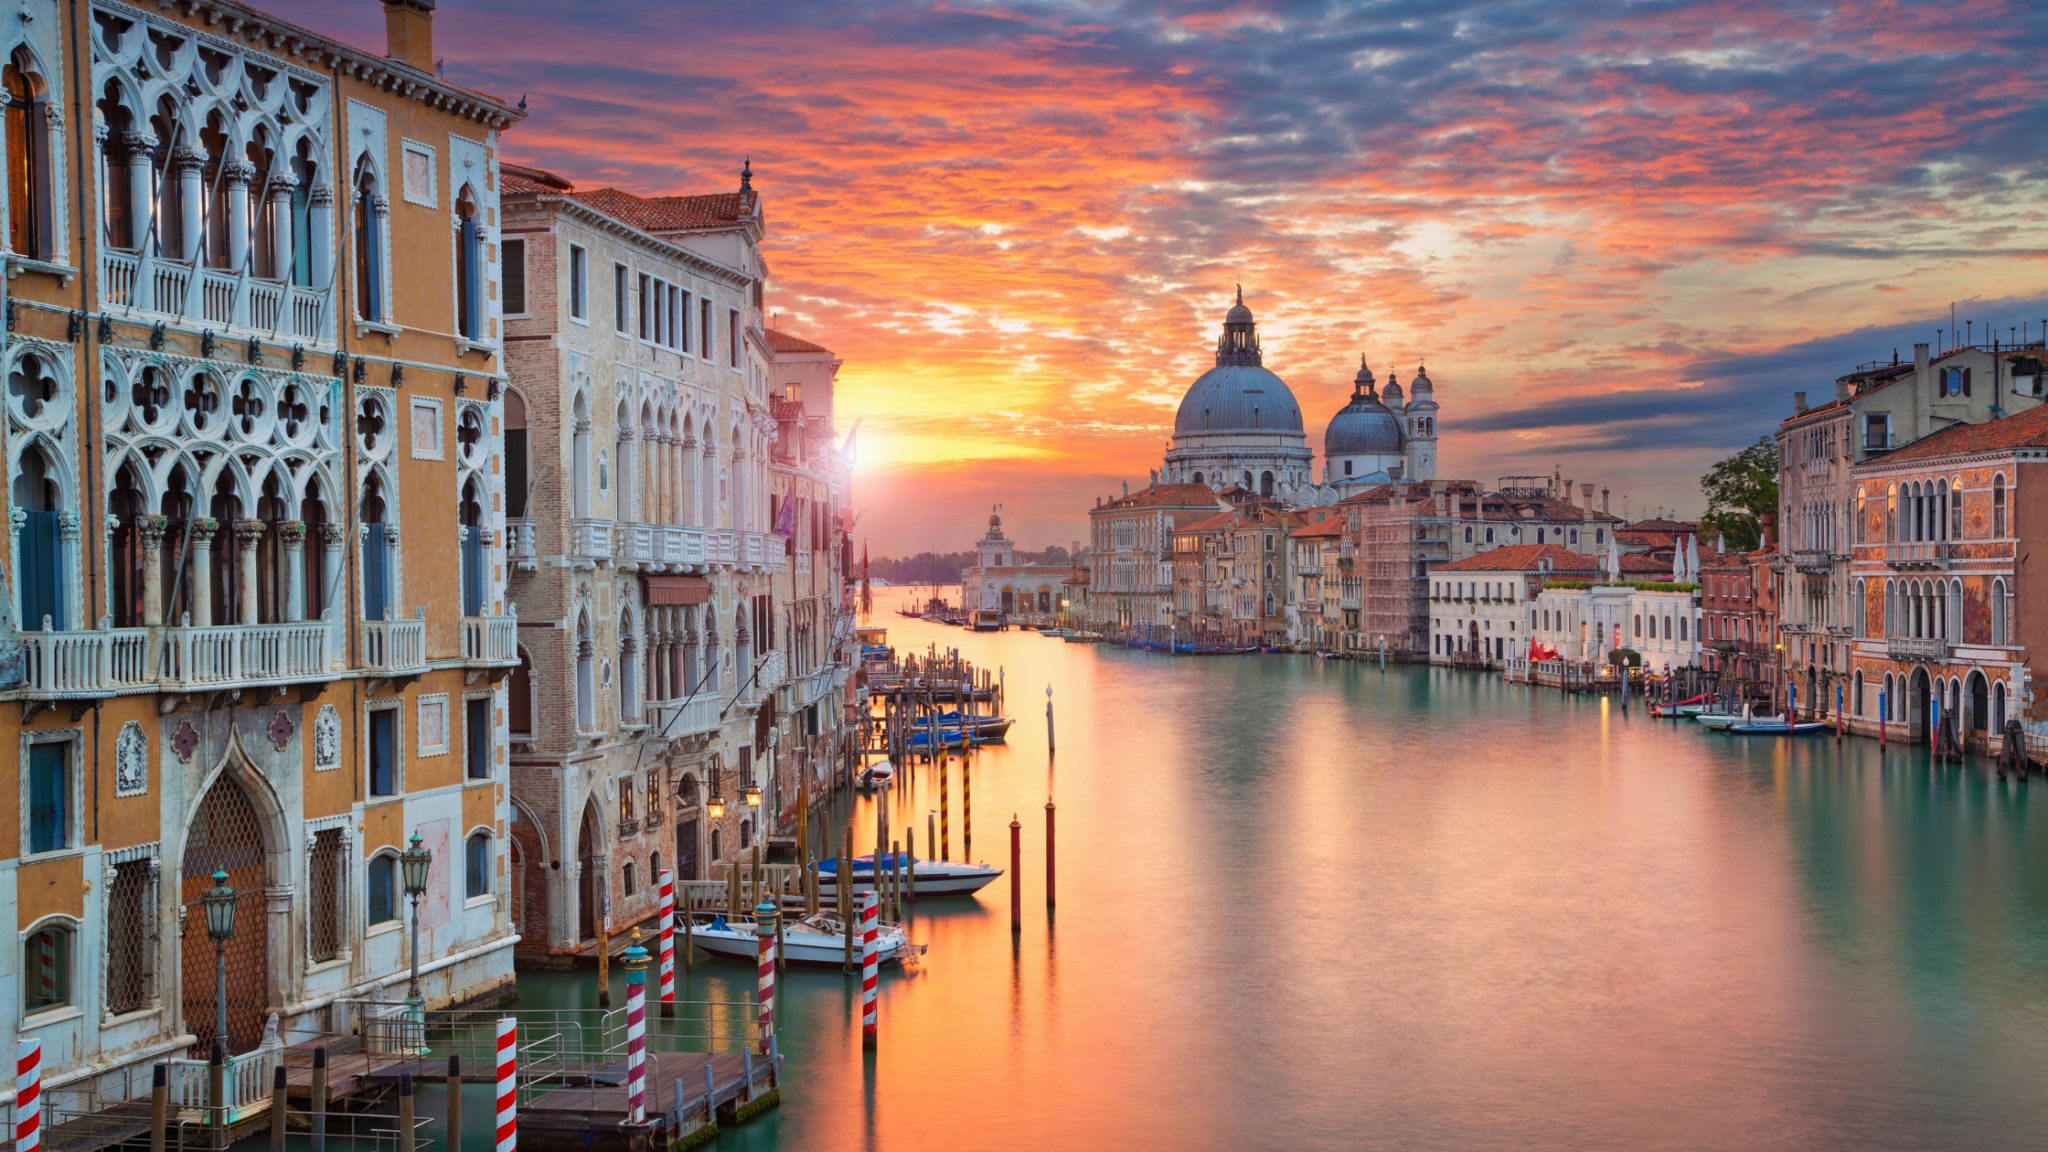 Business Class from Canada to Venice for $1,785 Round Trip on Condor Airlines